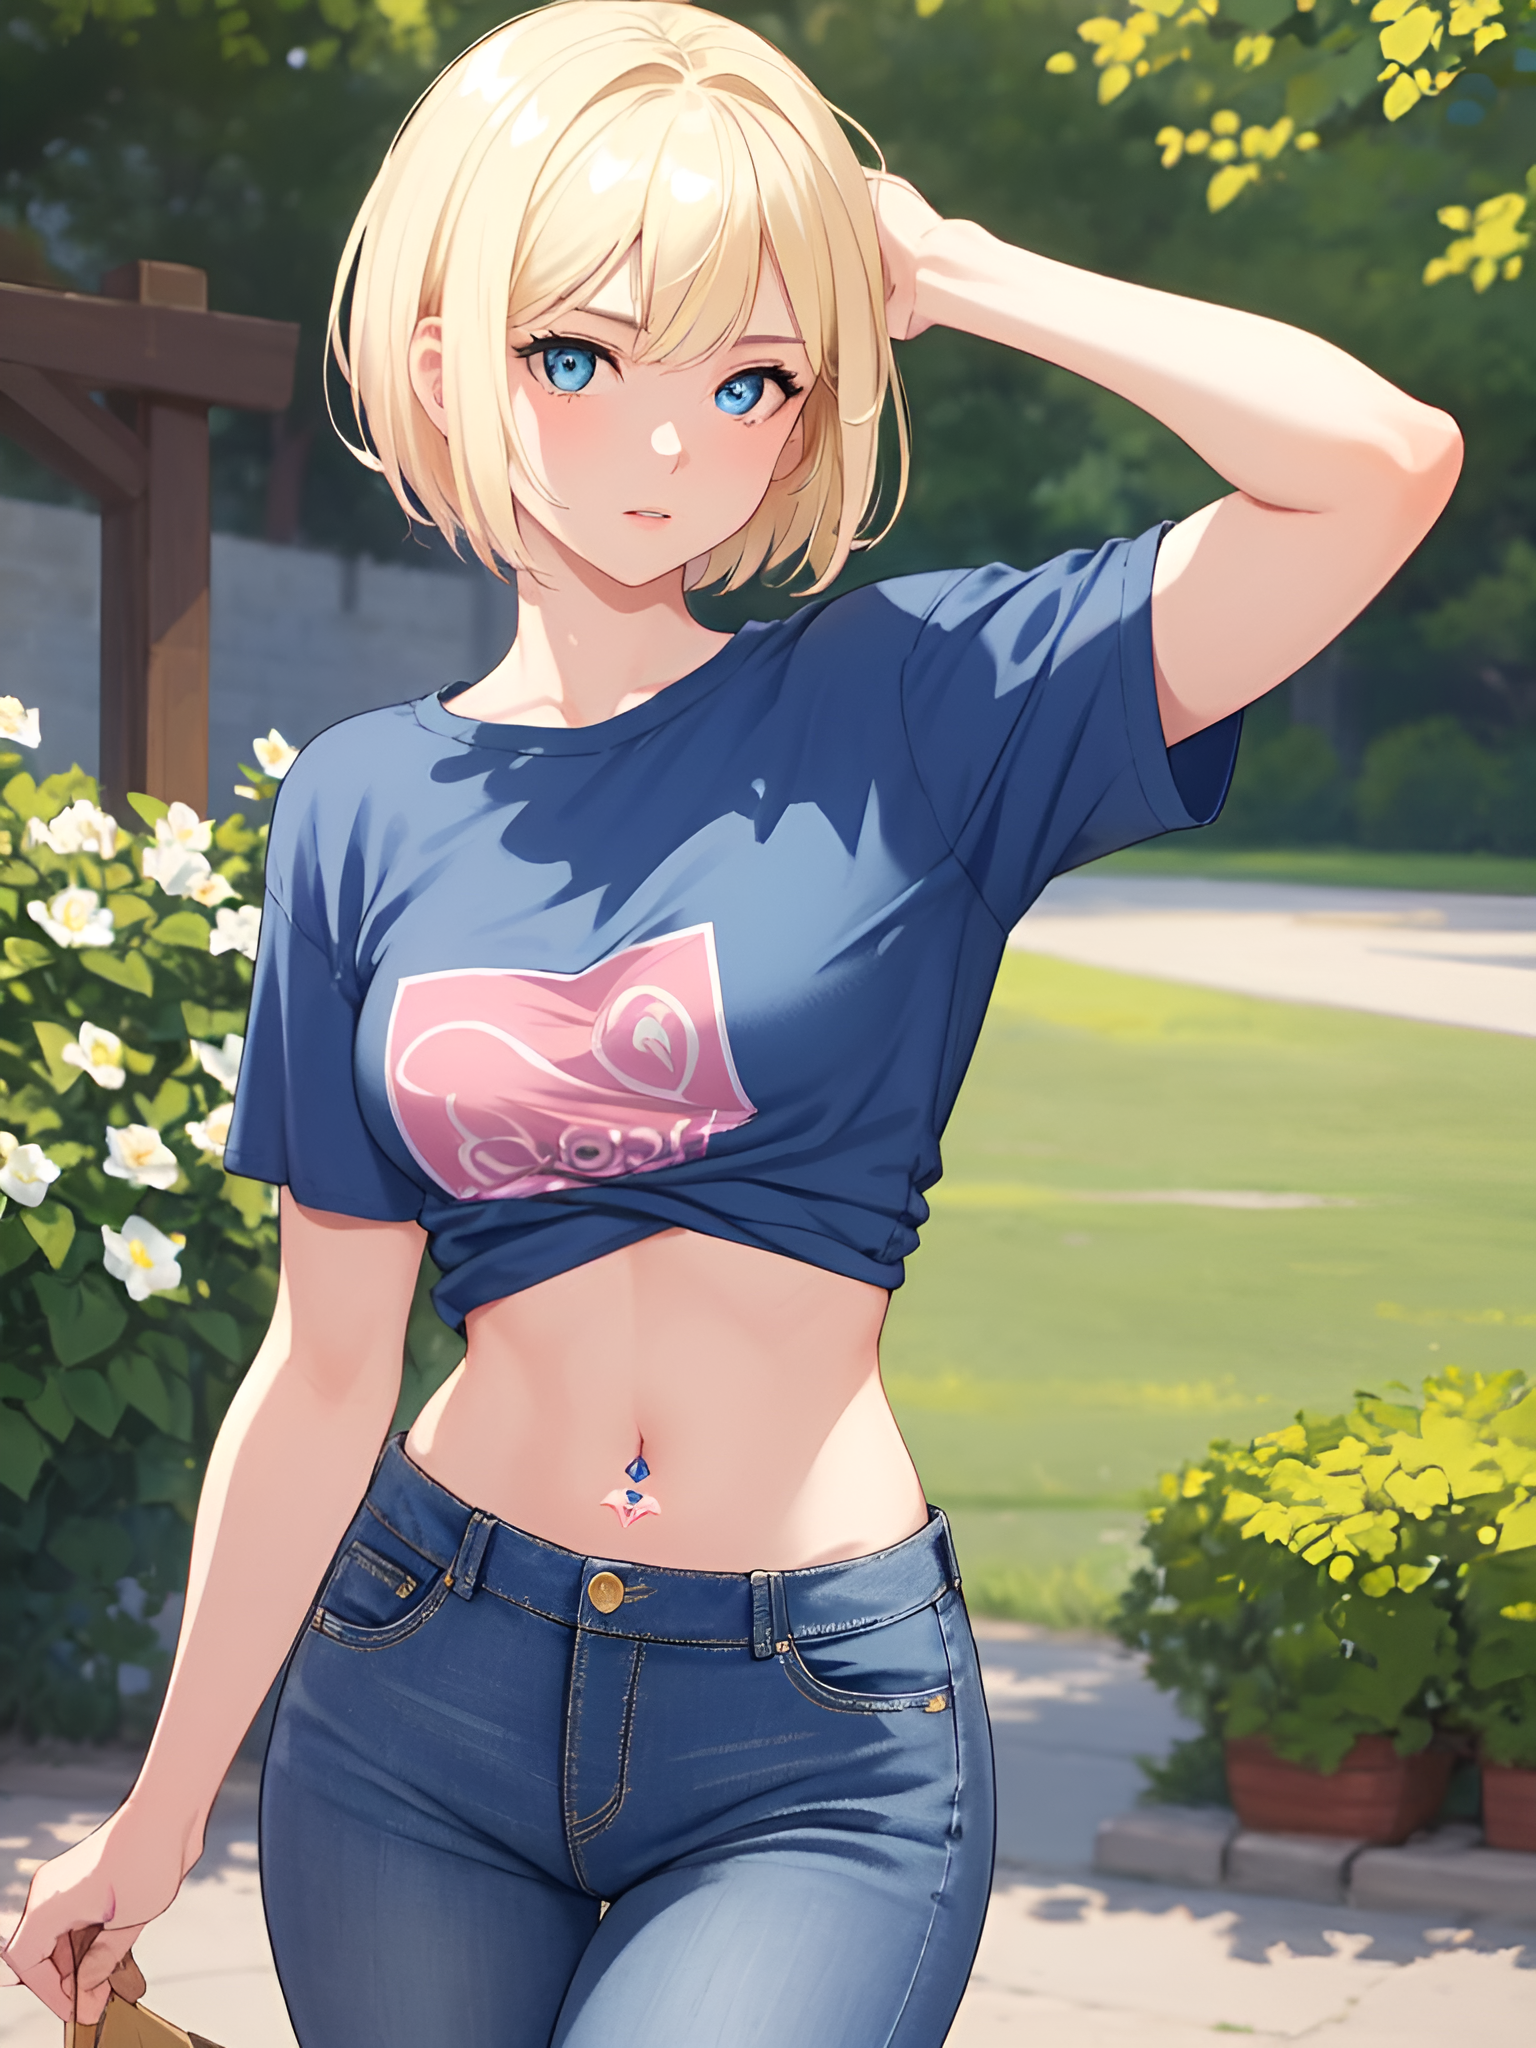 Anime 1536x2048 AI art anime girls blonde belly jeans looking at viewer blushing pierced navel blue eyes bare midriff short hair portrait display plants blue t-shirt flowers